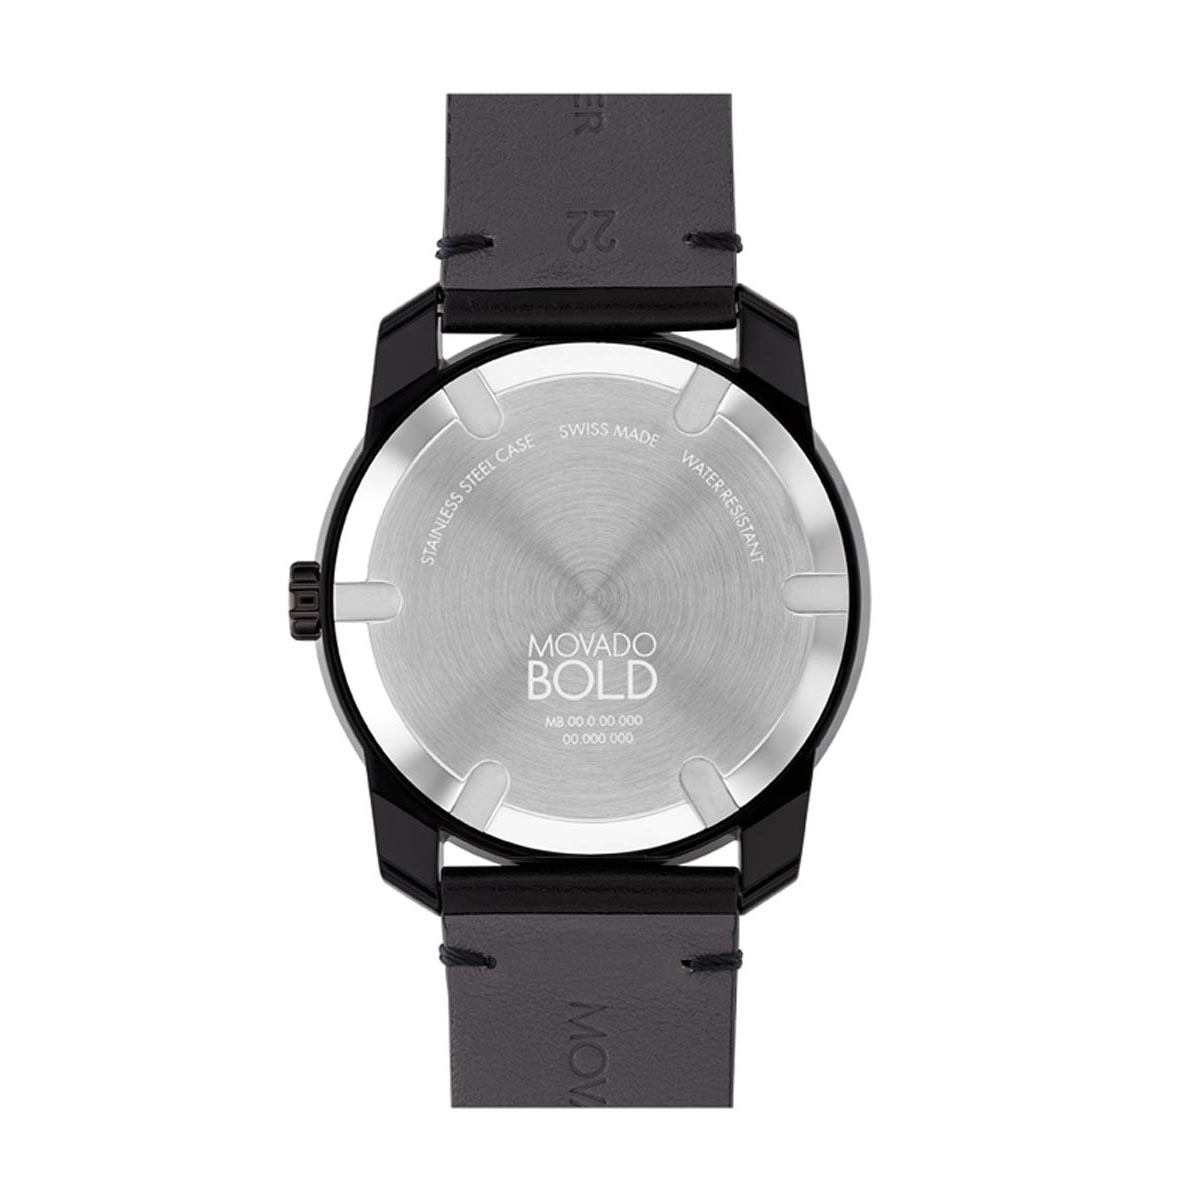 Movado Bold TR90 Mens Watch with Black and White Dial and Black Leather Strap (Swiss quartz movement)